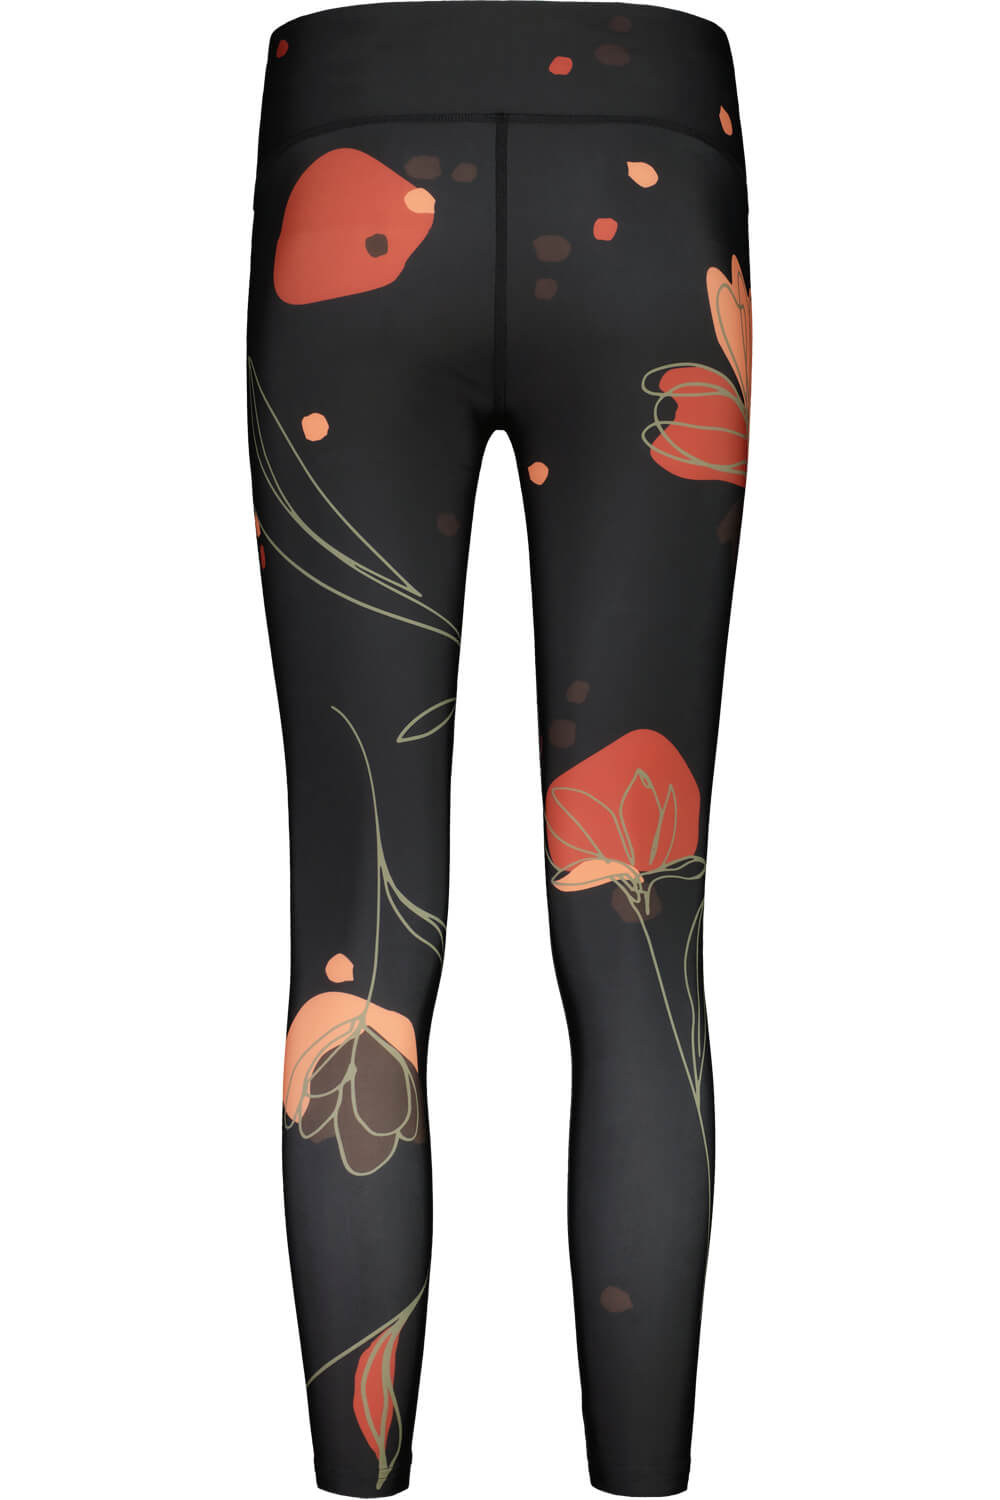 H.WST LEGGINGS - APH8026 – The Sports Center